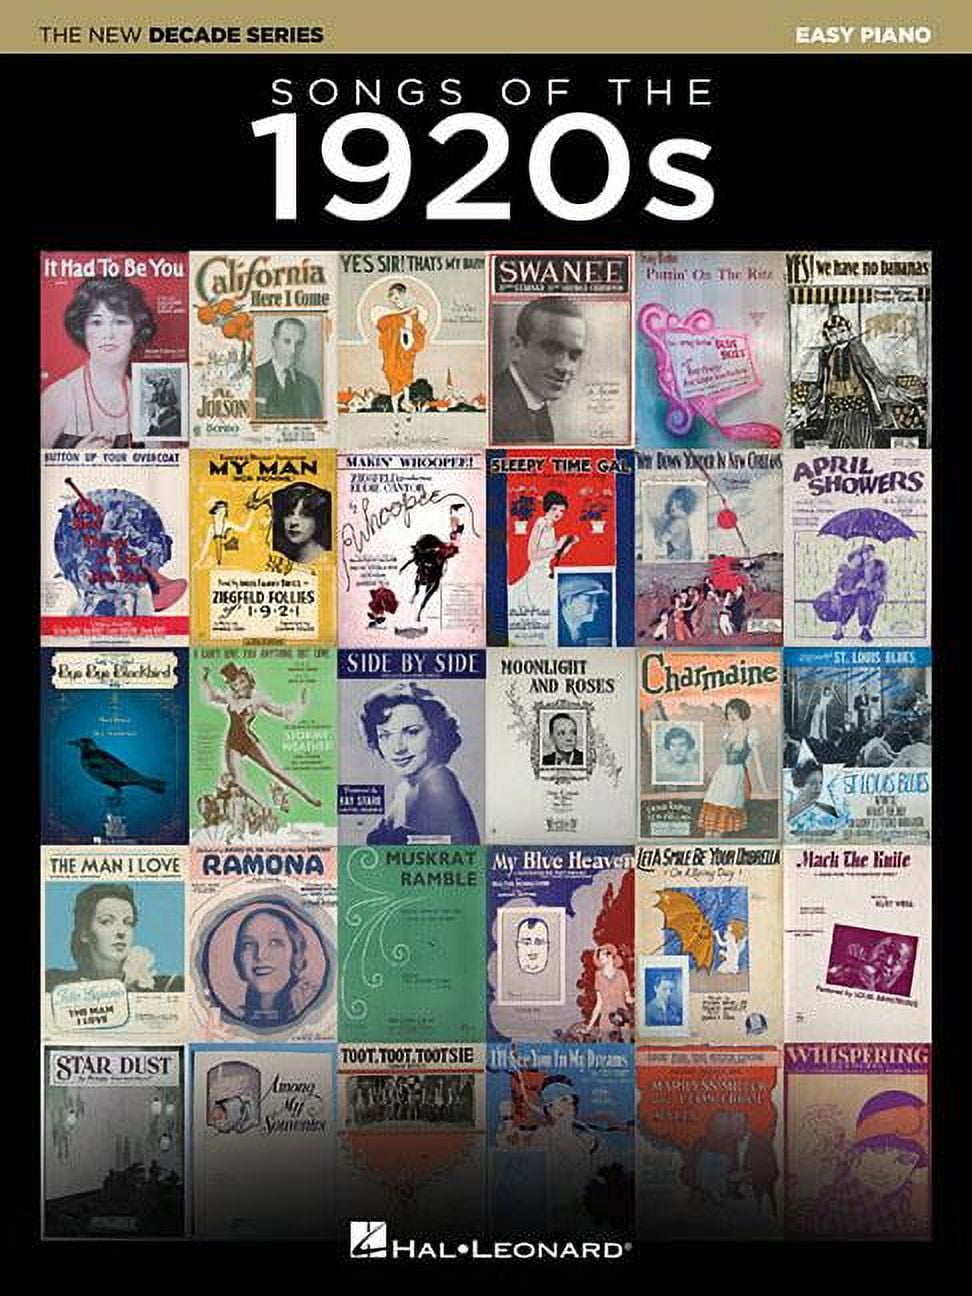 Songs Of The 1920s The New Decade Series Paperback 9781540034311 Af35502e E2e5 4bf2 8ce4 7a8ede28c377.c91669f2fc917833adec501a19da7b7c 